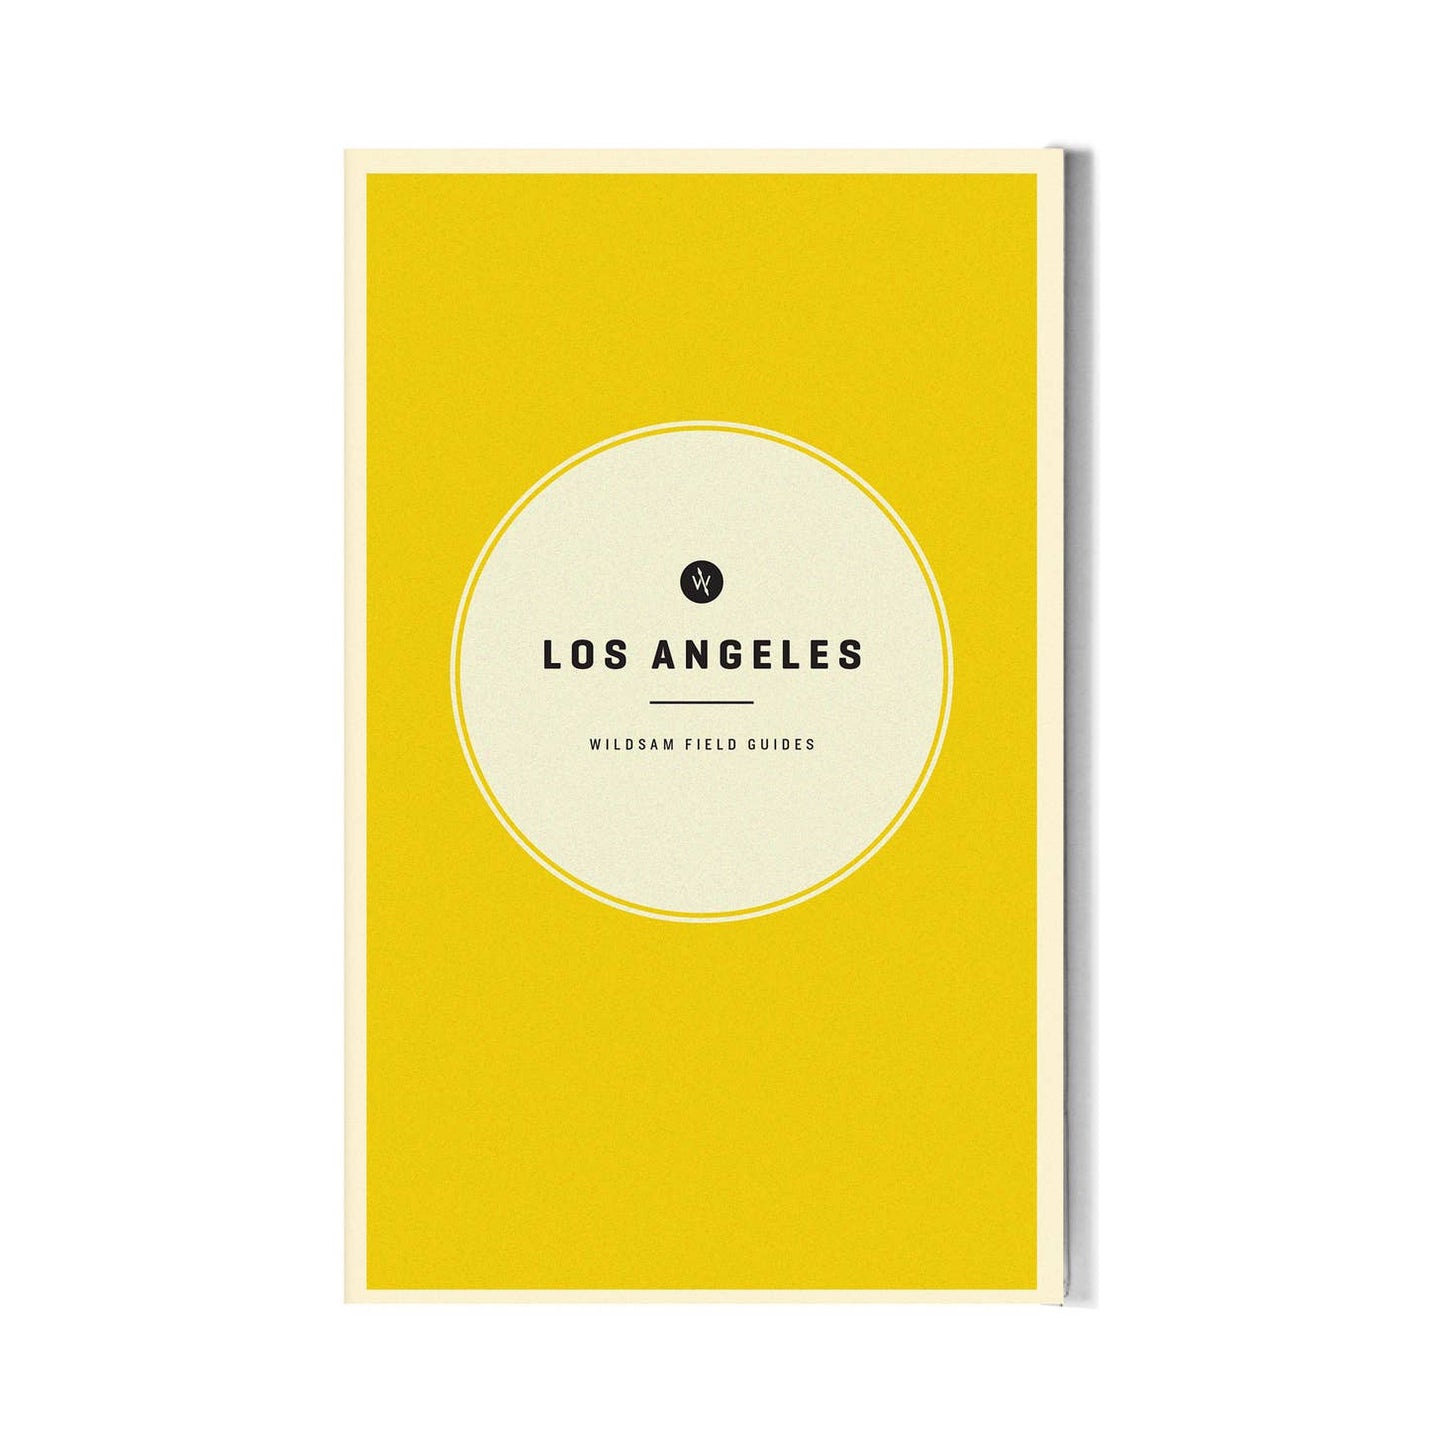 Wildsam Field Guides - Los Angeles explores the vast, sun-bathed California metropolis, working closely with a team of savvy locals. Includes Hollywood lore, gang culture, palm trees, LA literature, the Dodgers, and more.